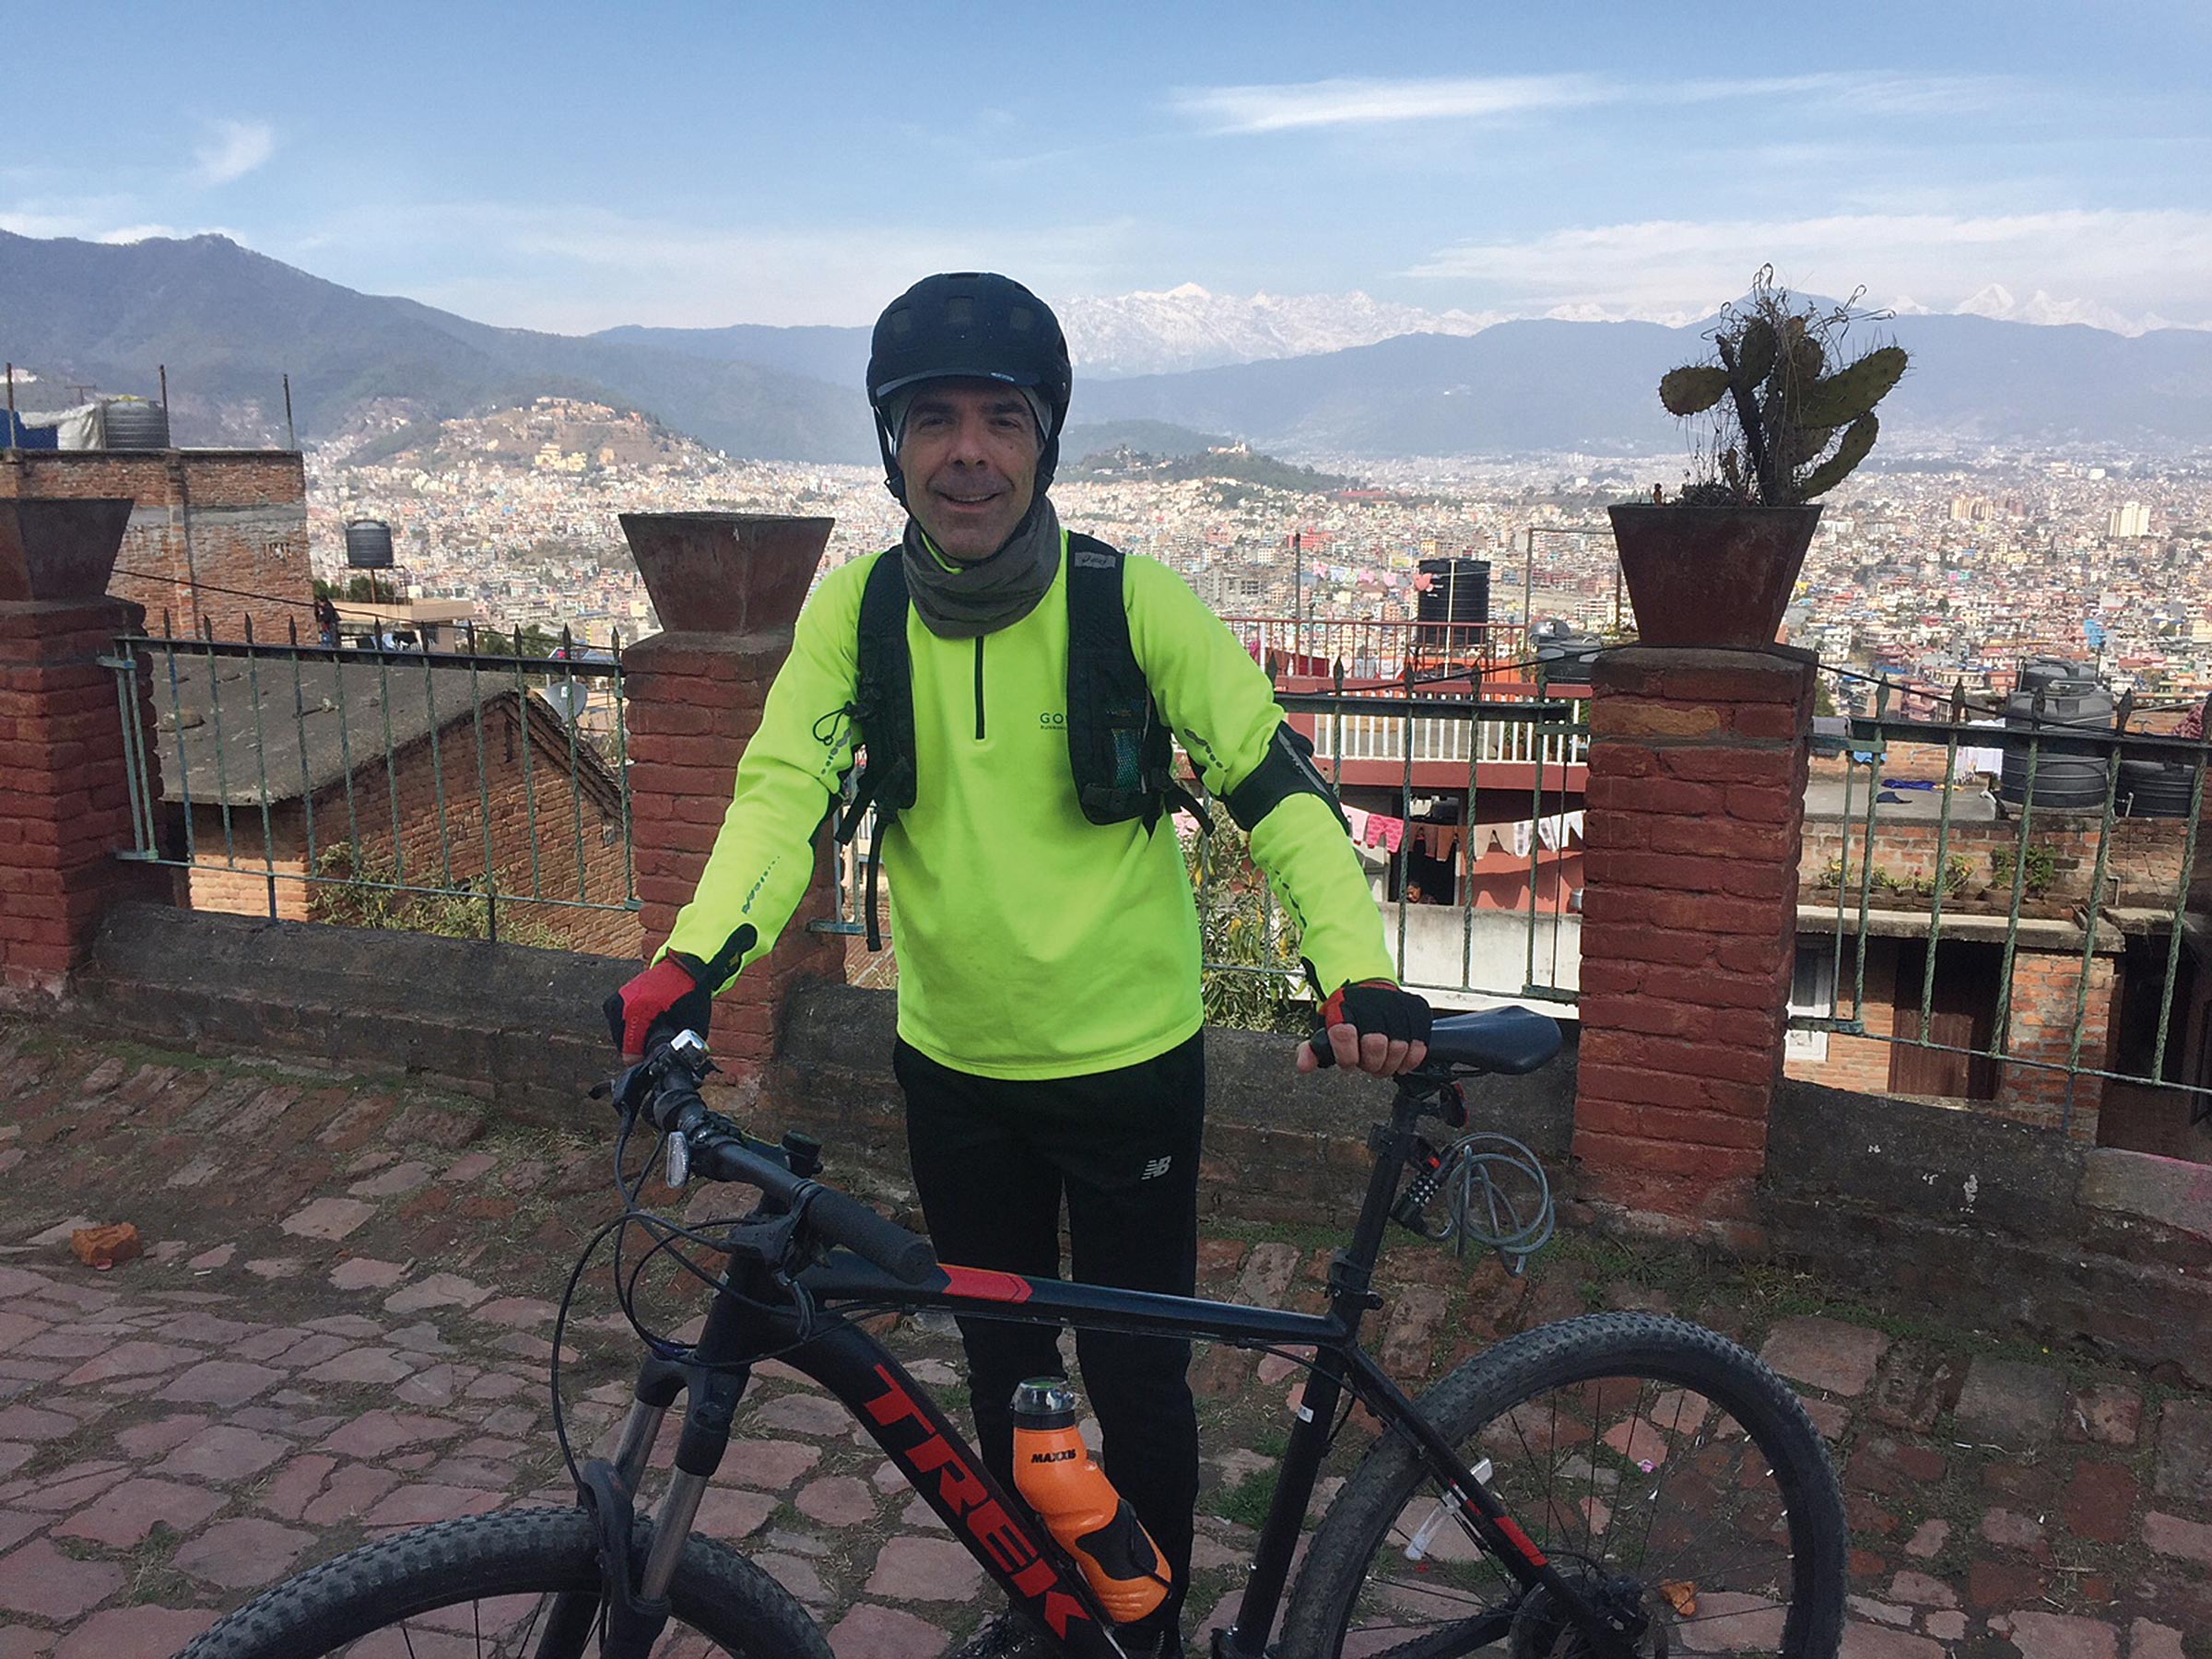 Food, France, and Nepal: Getting to know the Cycling Ambassador